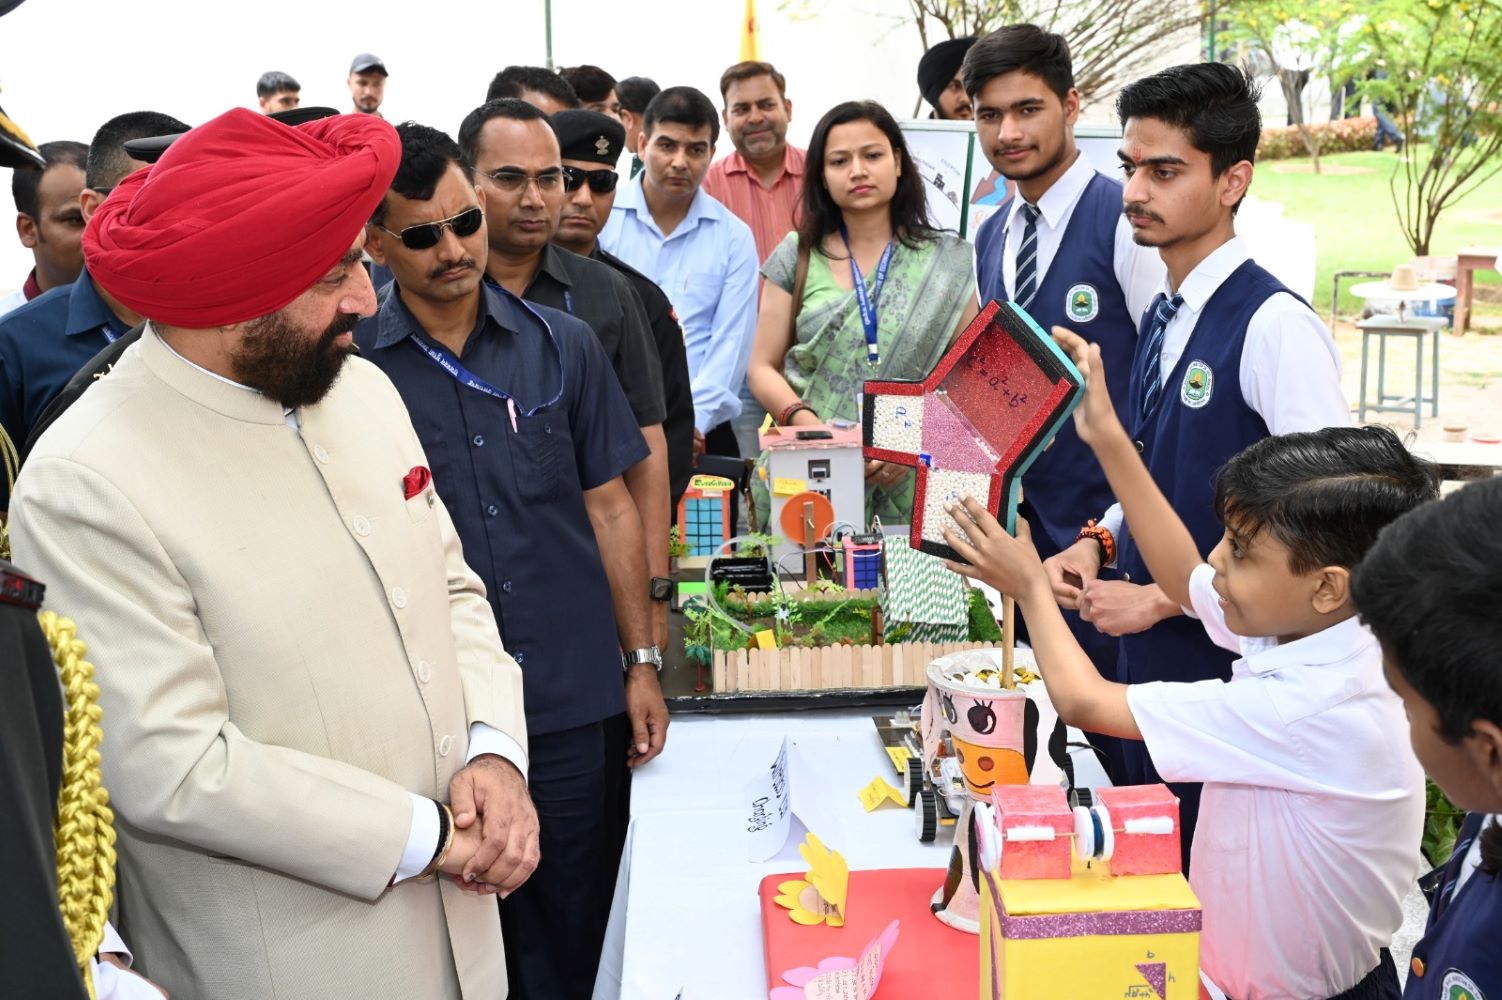 IIT Roorkee celebrates National Technology Day with great theme